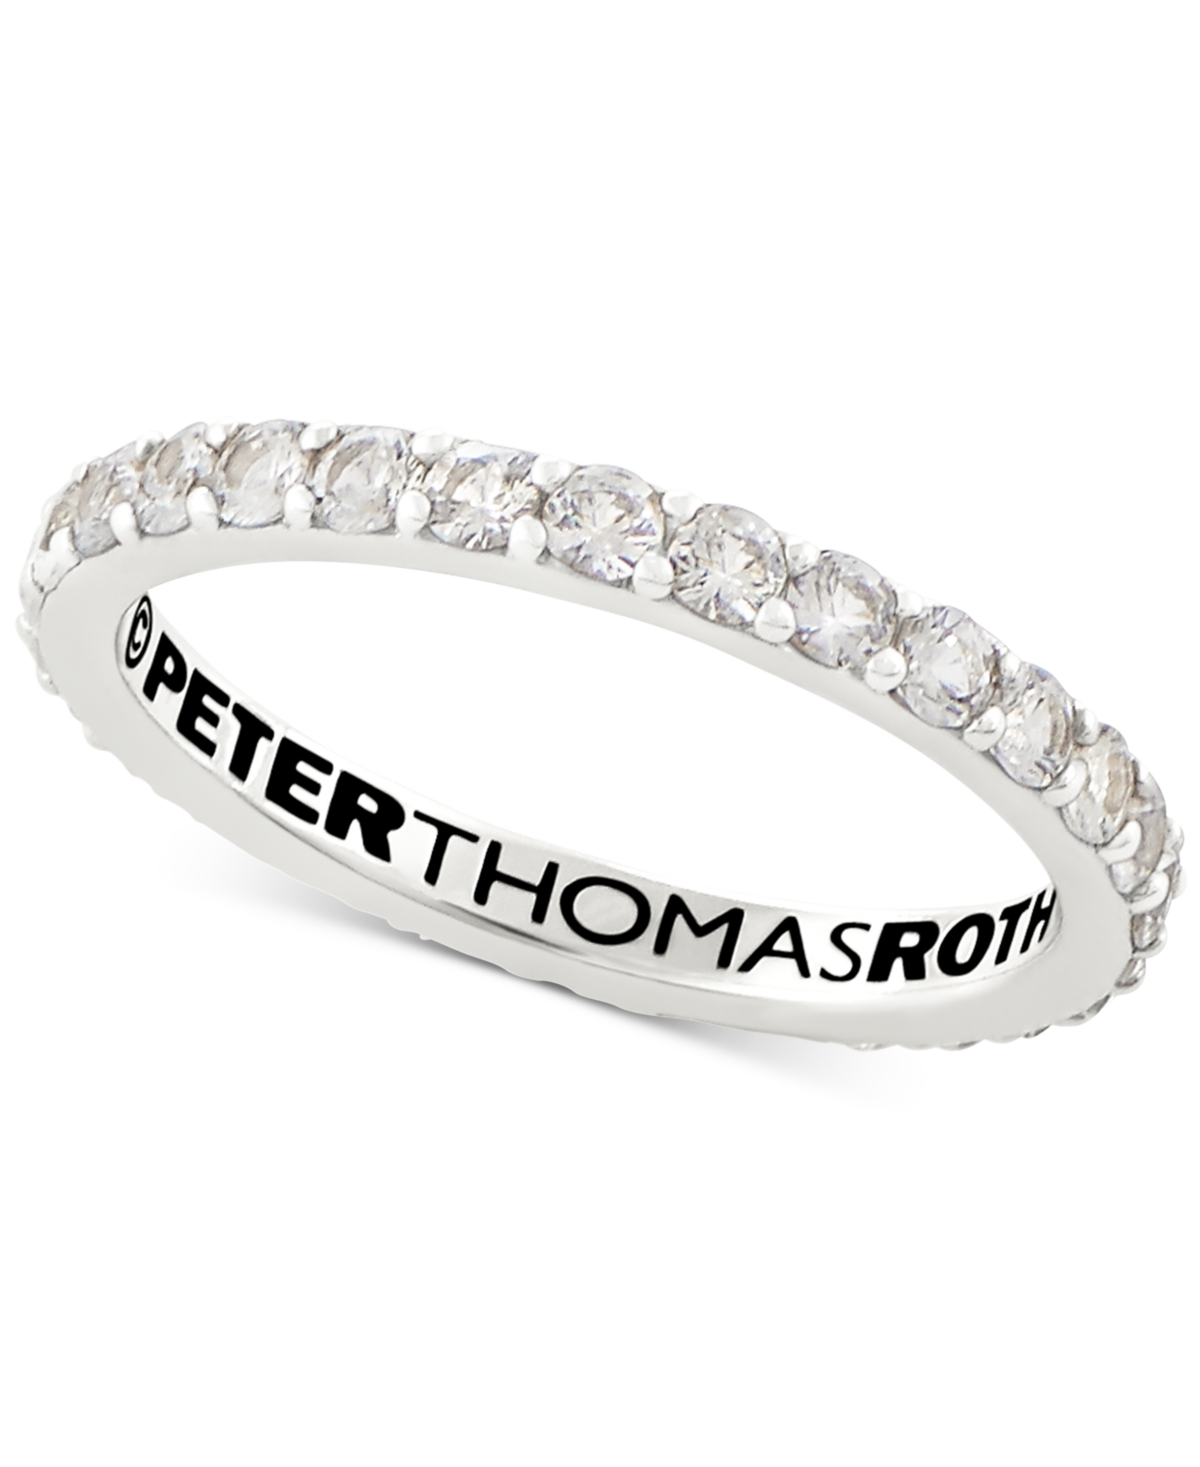 Peter Thomas White Topaz Stacking Band (3/4 ct. t.w.) in Sterling Silver - White